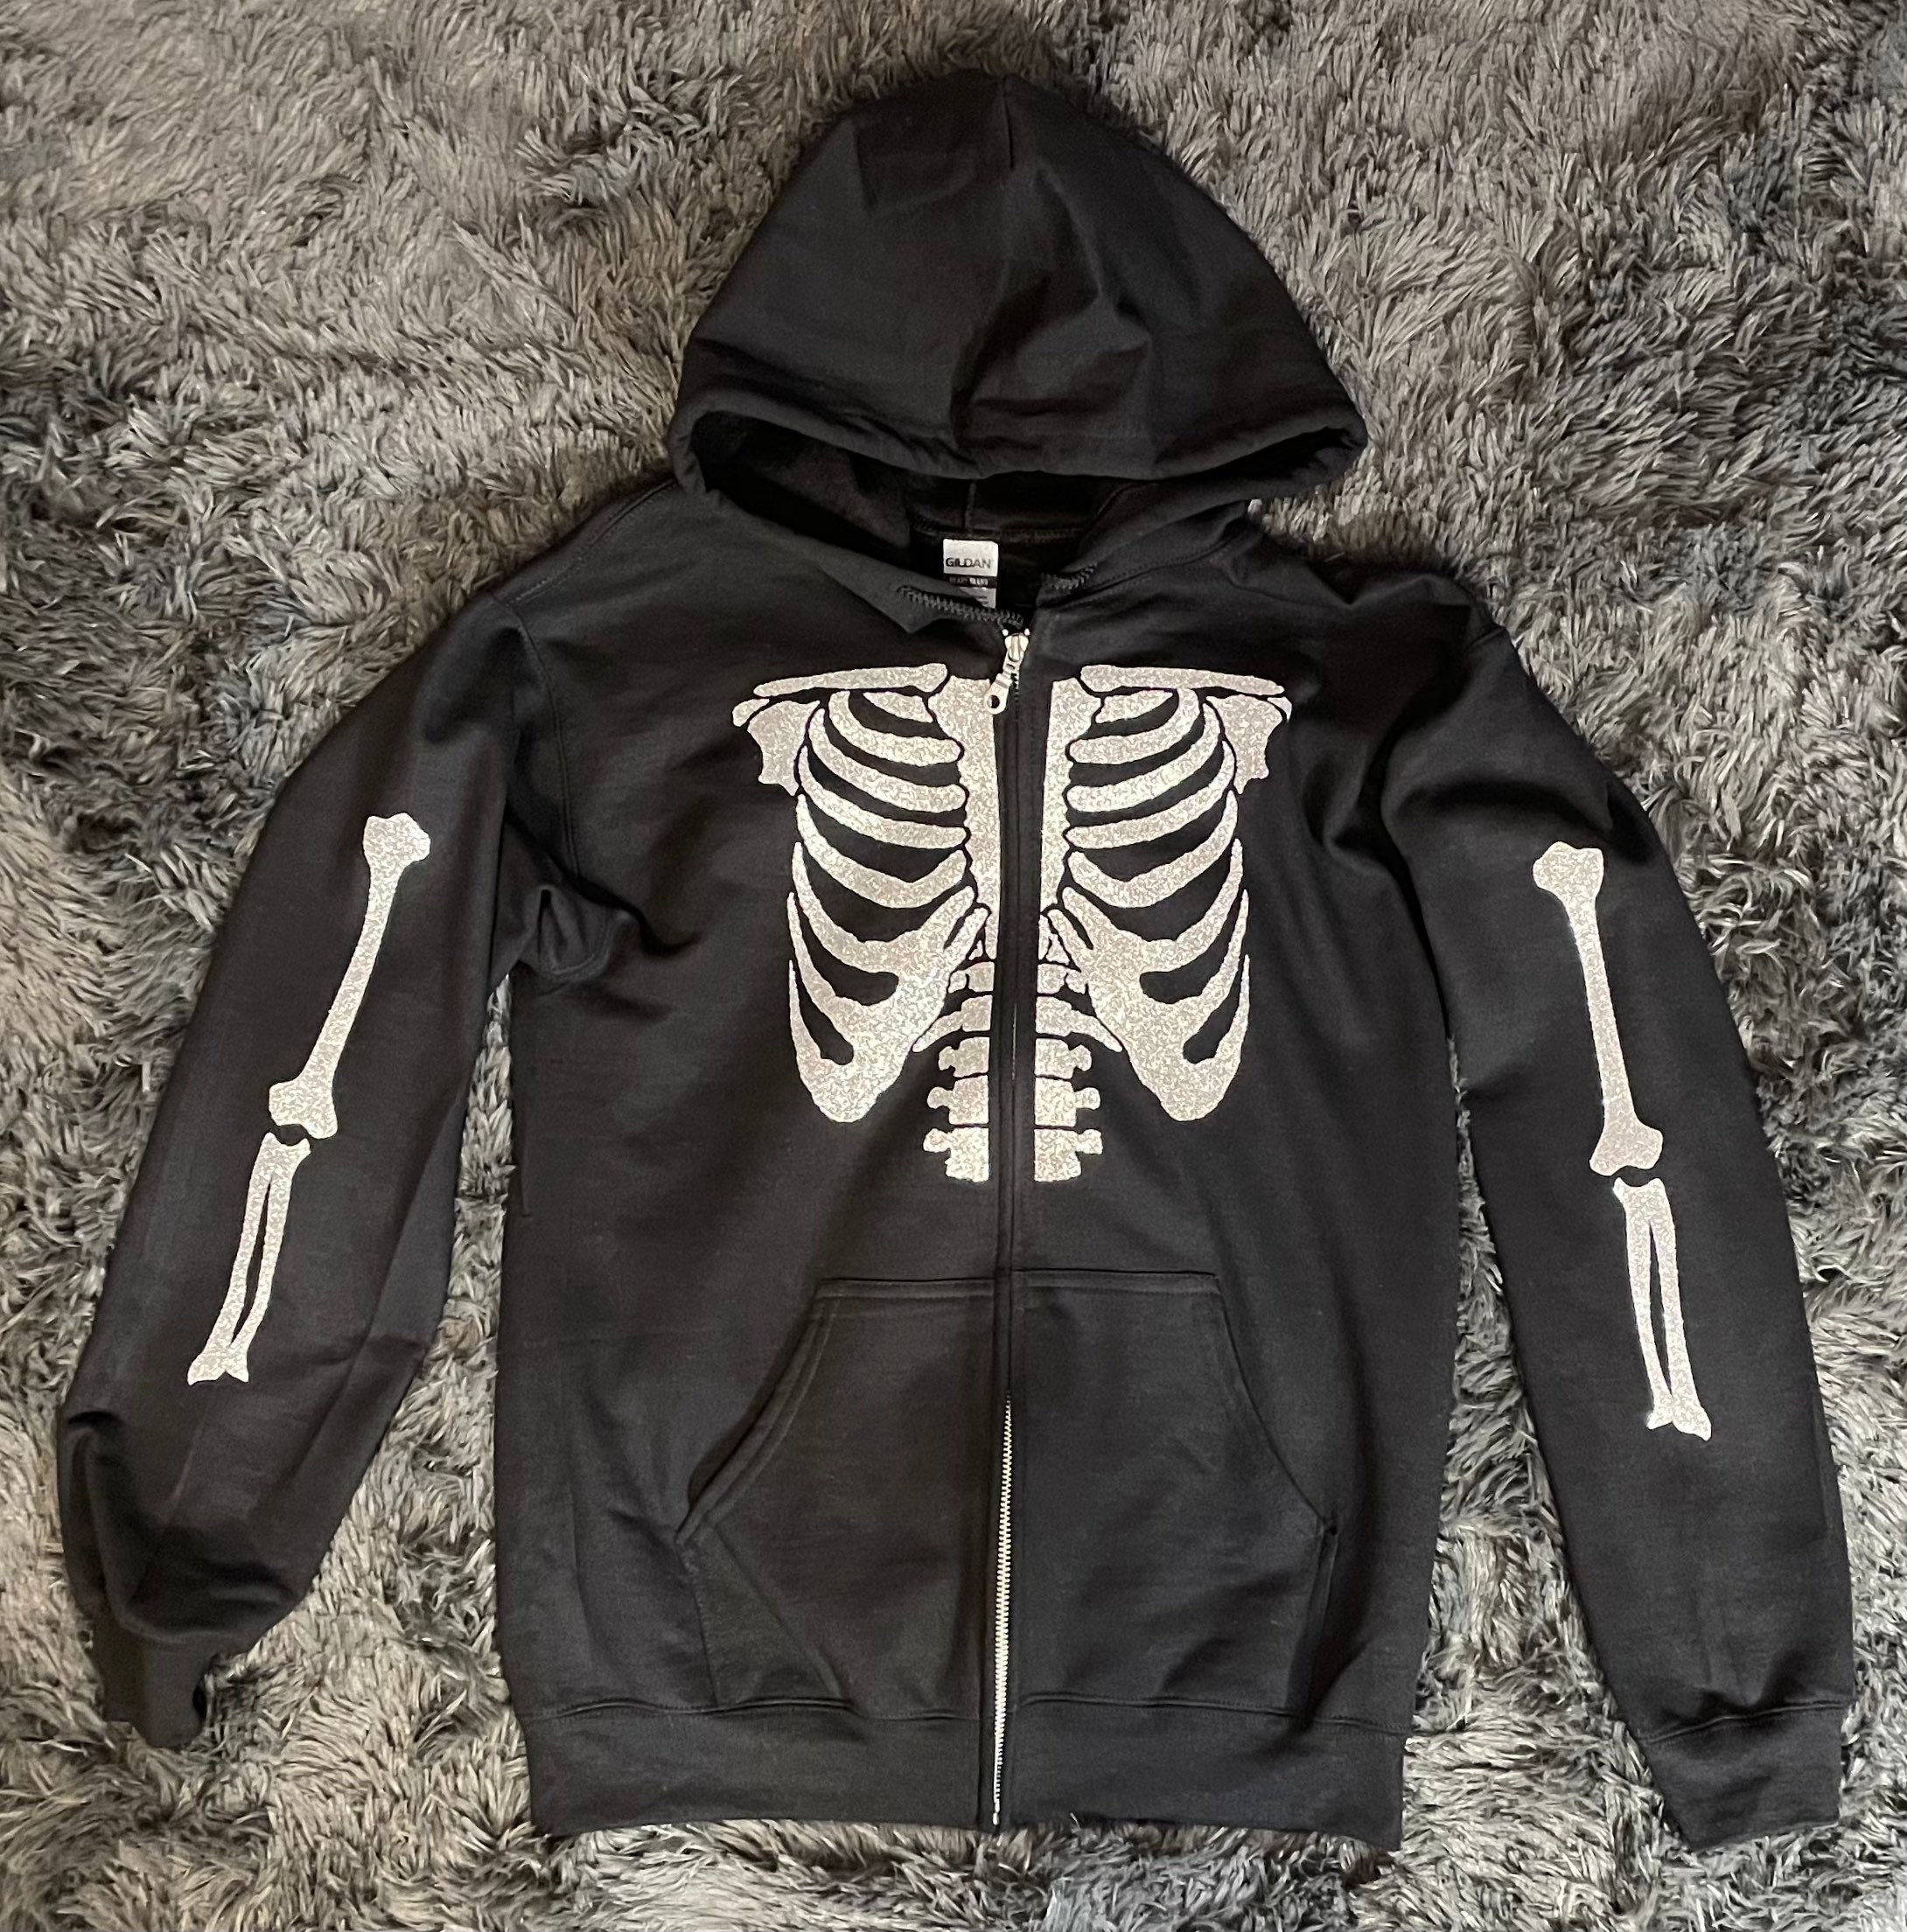 Skeleton Hoodie for sale | Only 3 left at -70%